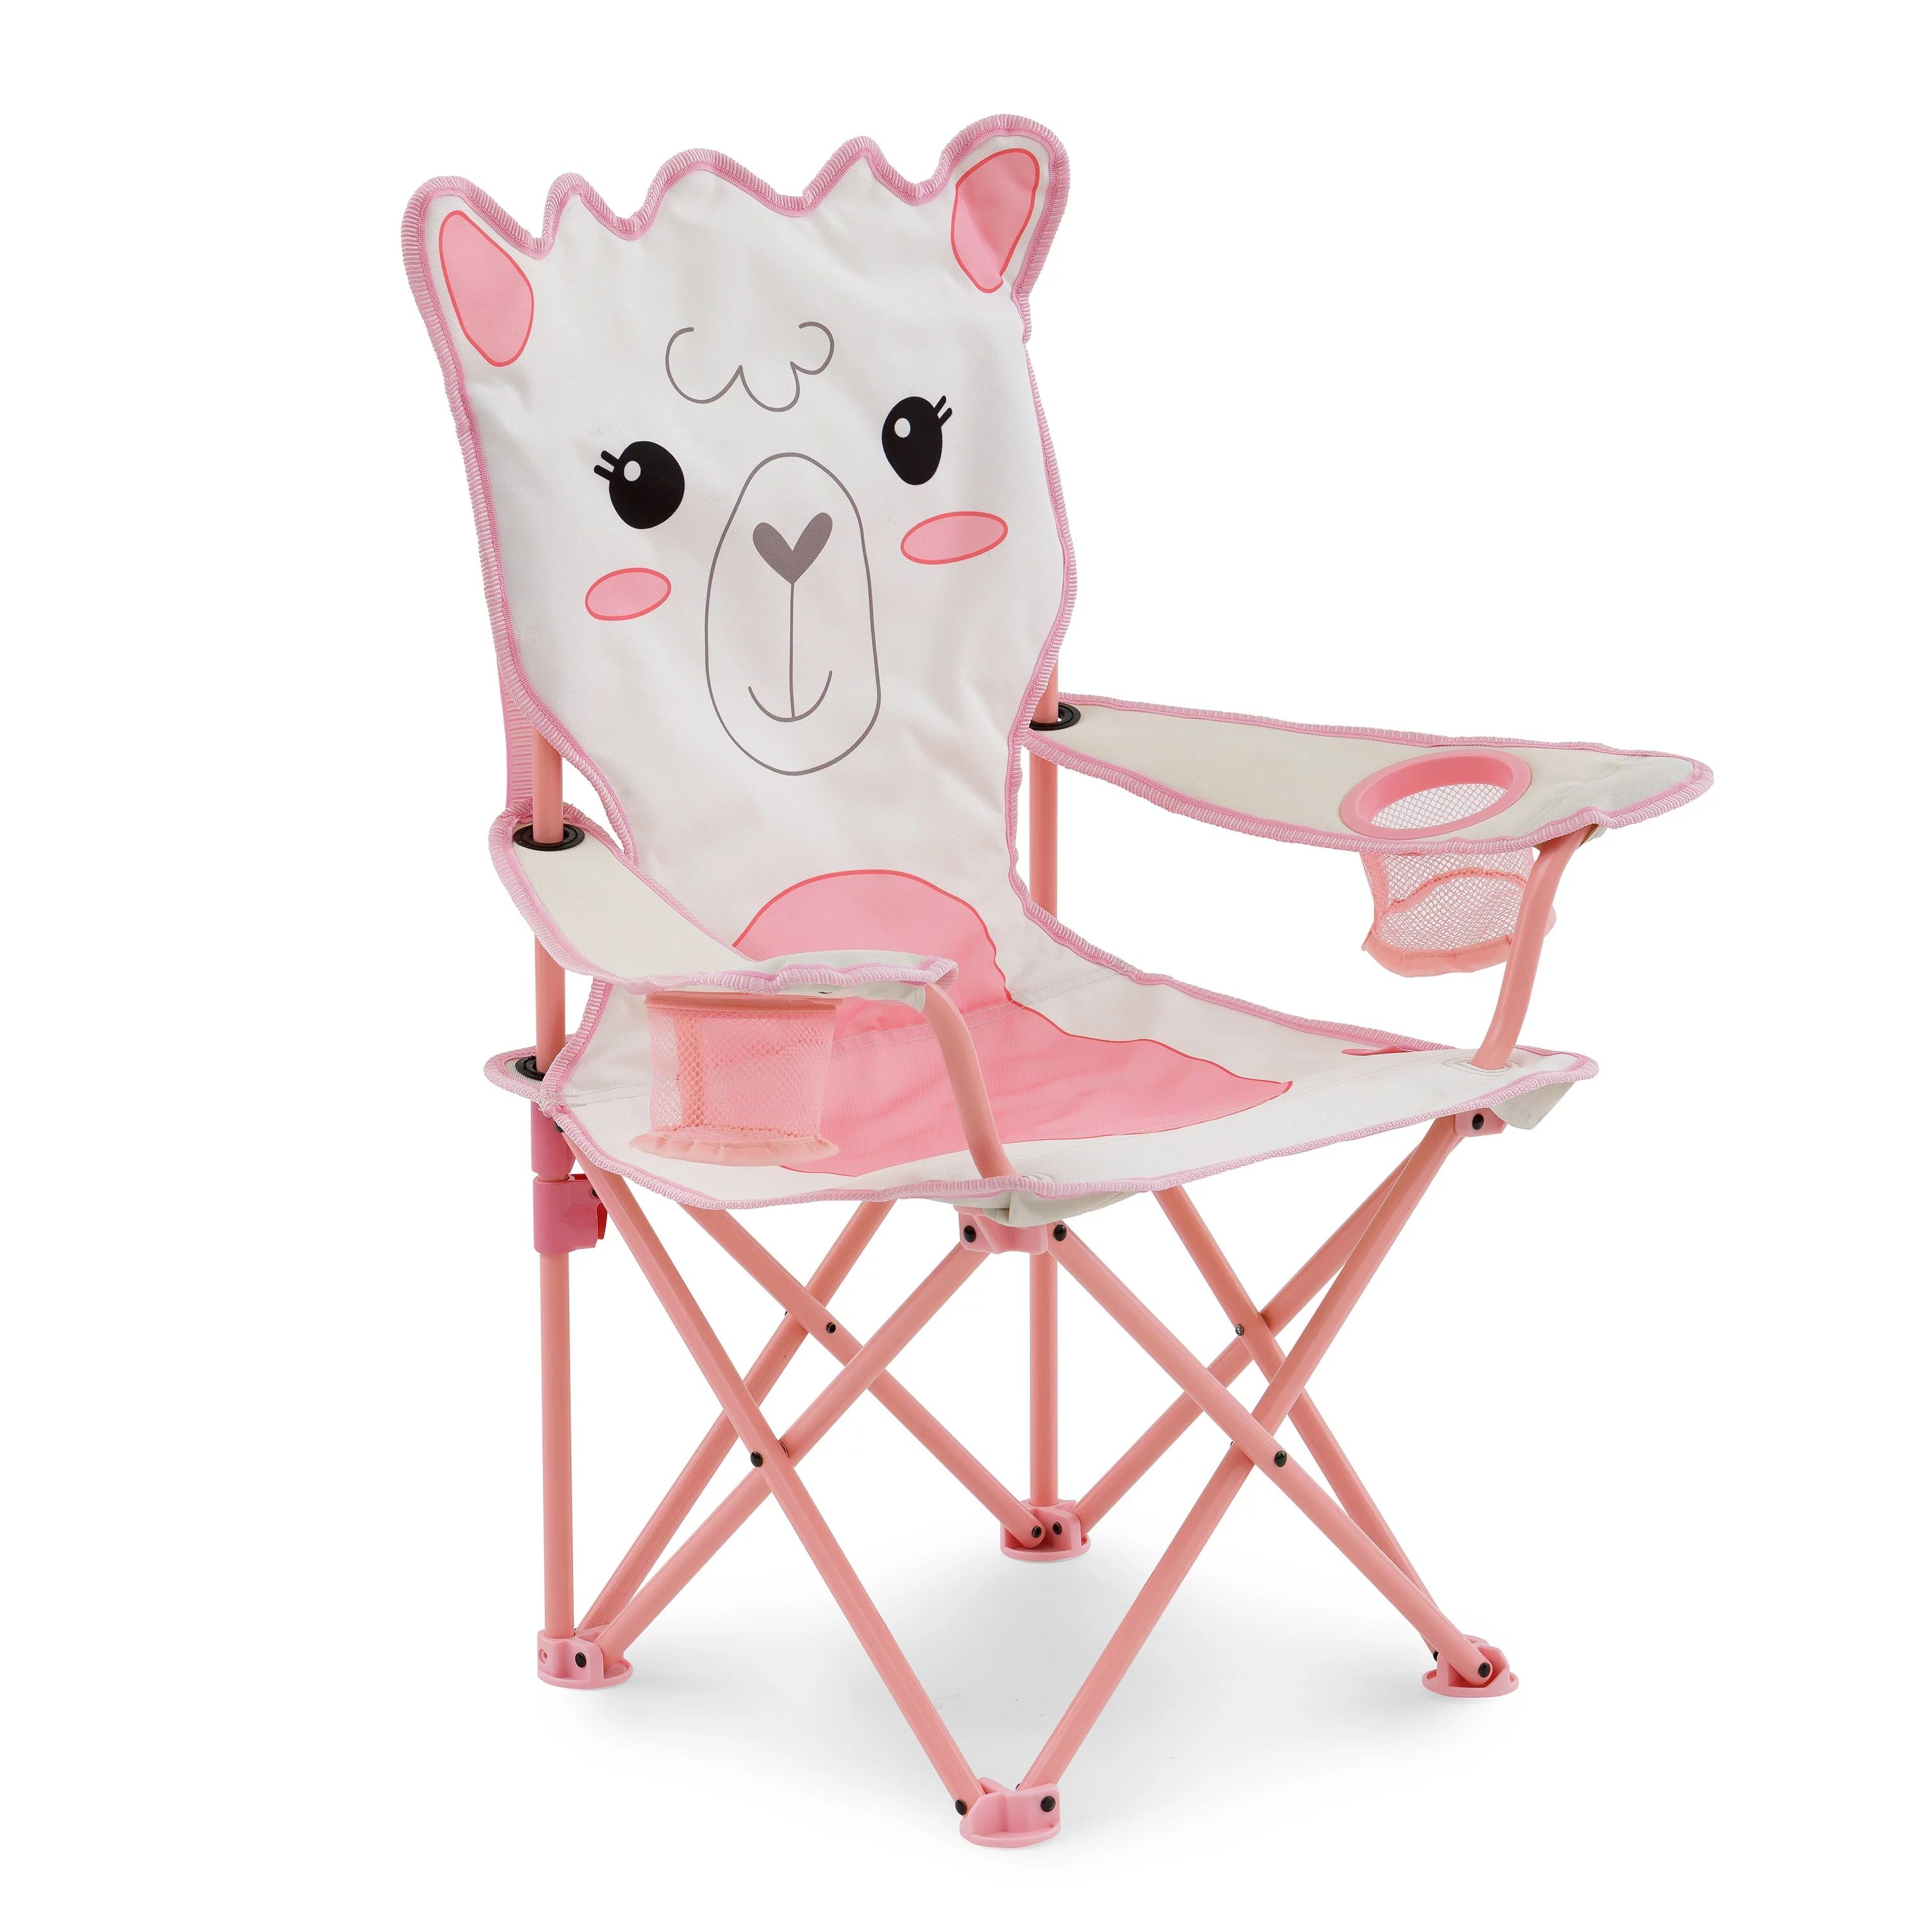 Firefly! Outdoor Gear Izzie the Llama Kid's Camping Chair - Pink/White Color - Walmart.com | Walmart (US)